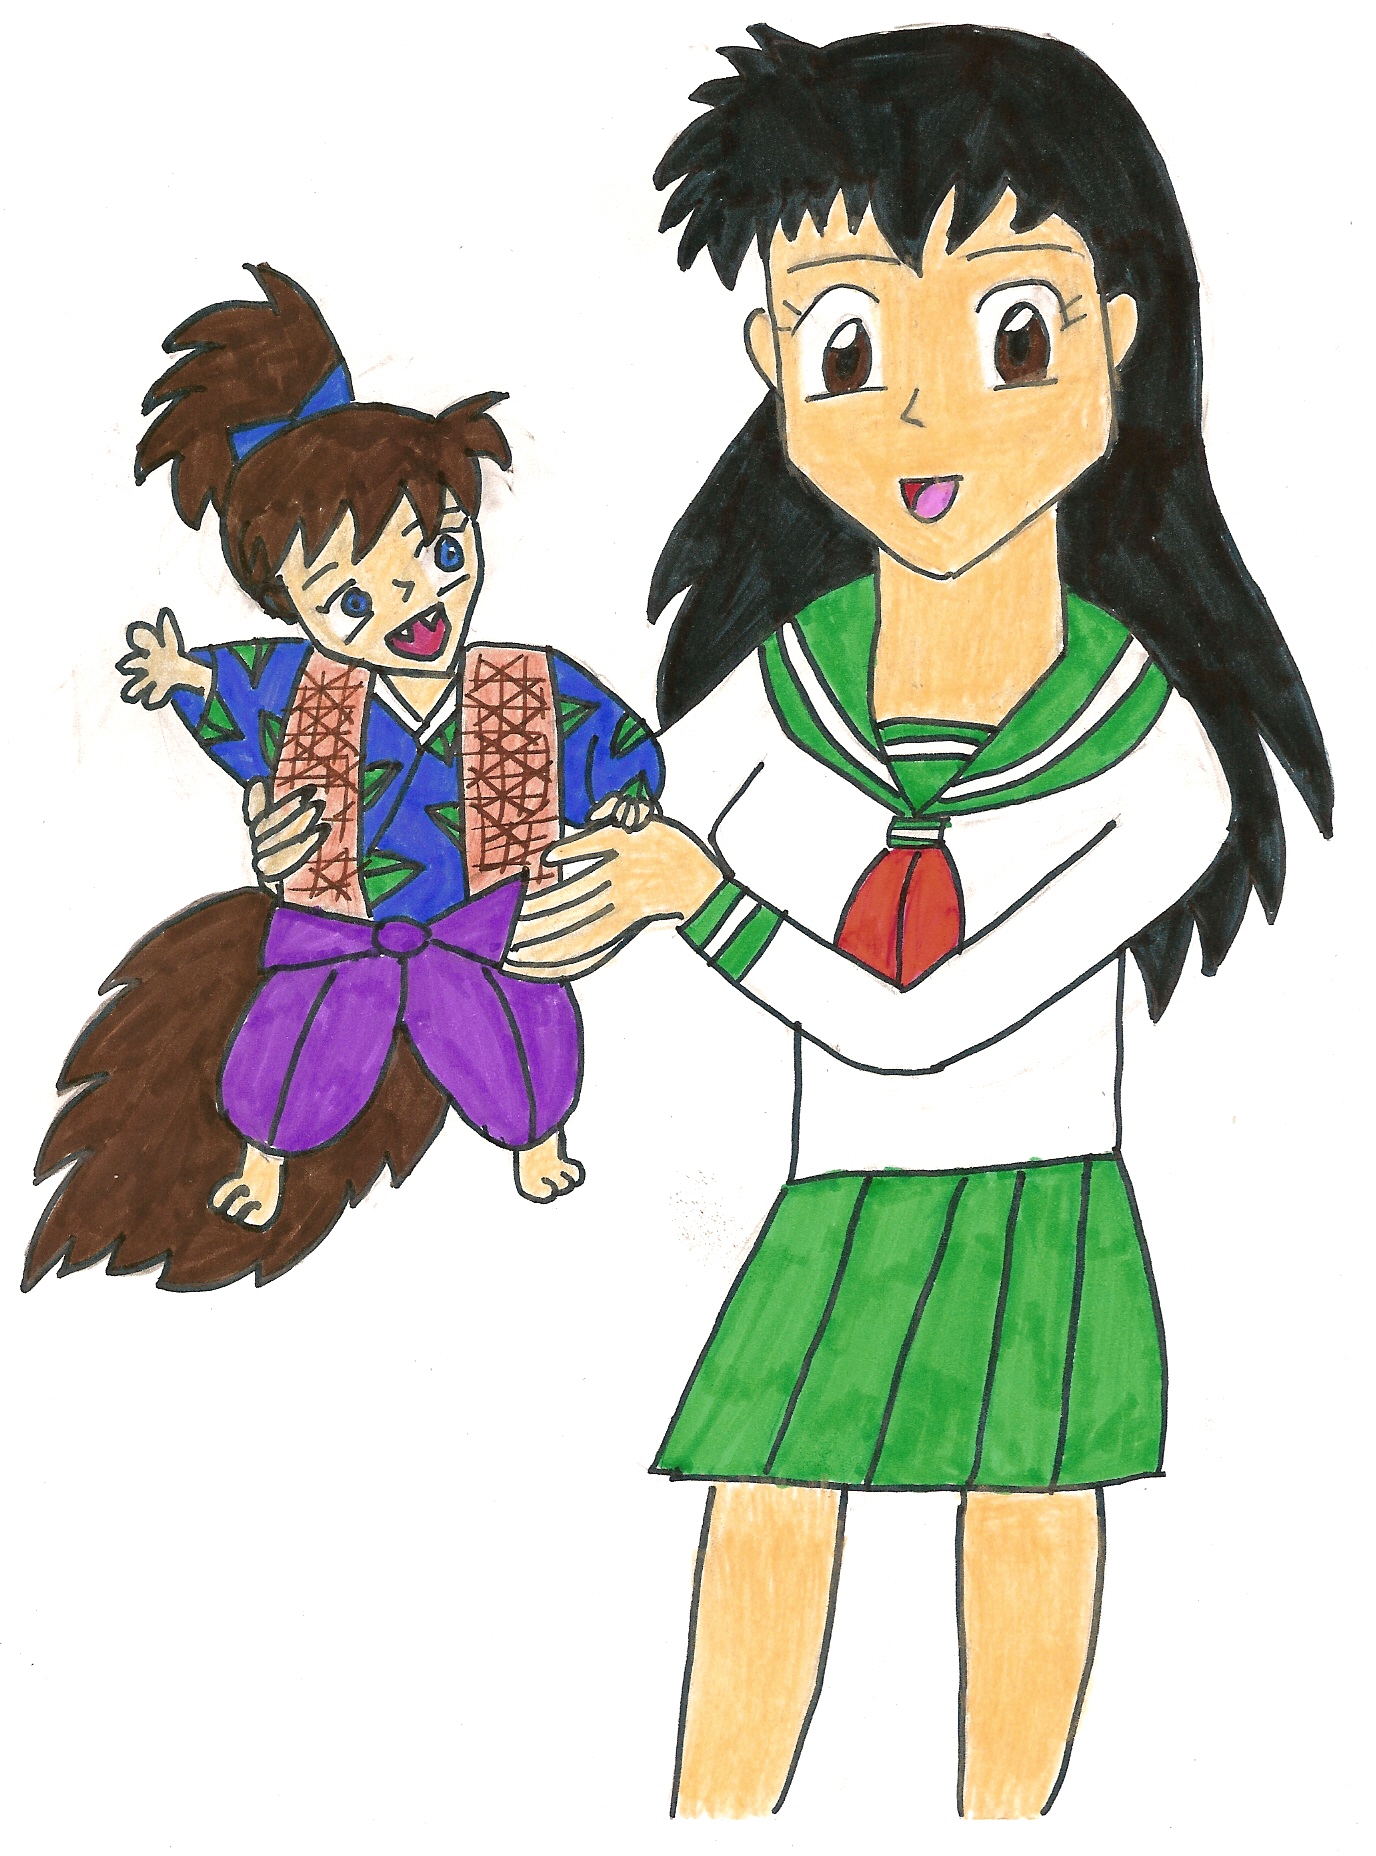 Shippo and Kagome by sonia555220